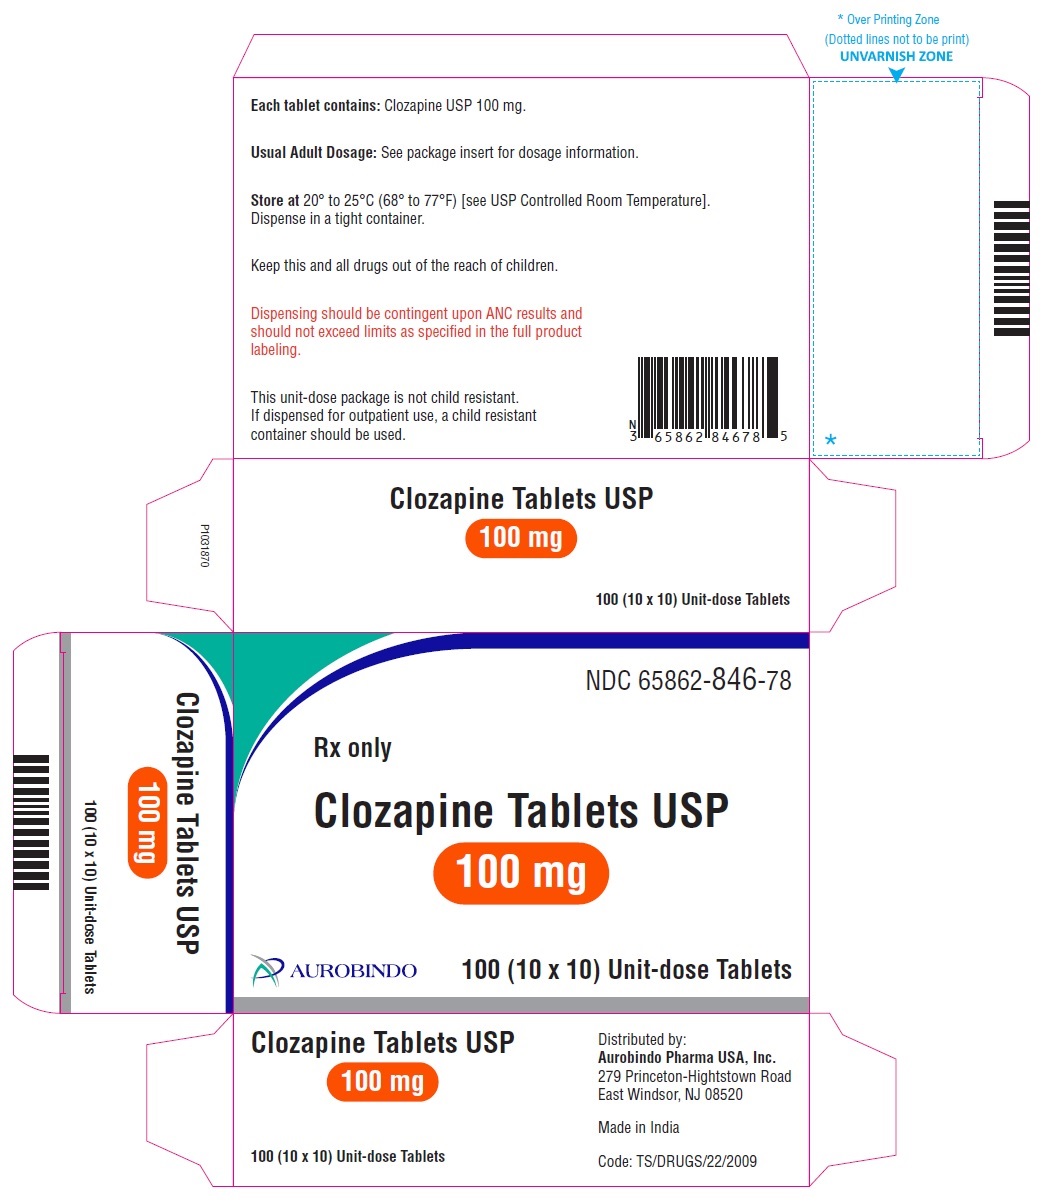 PACKAGE LABEL-PRINCIPAL DISPLAY PANEL - 100 mg Blister Carton 100 (10 x 10) Unit-dose Tablets